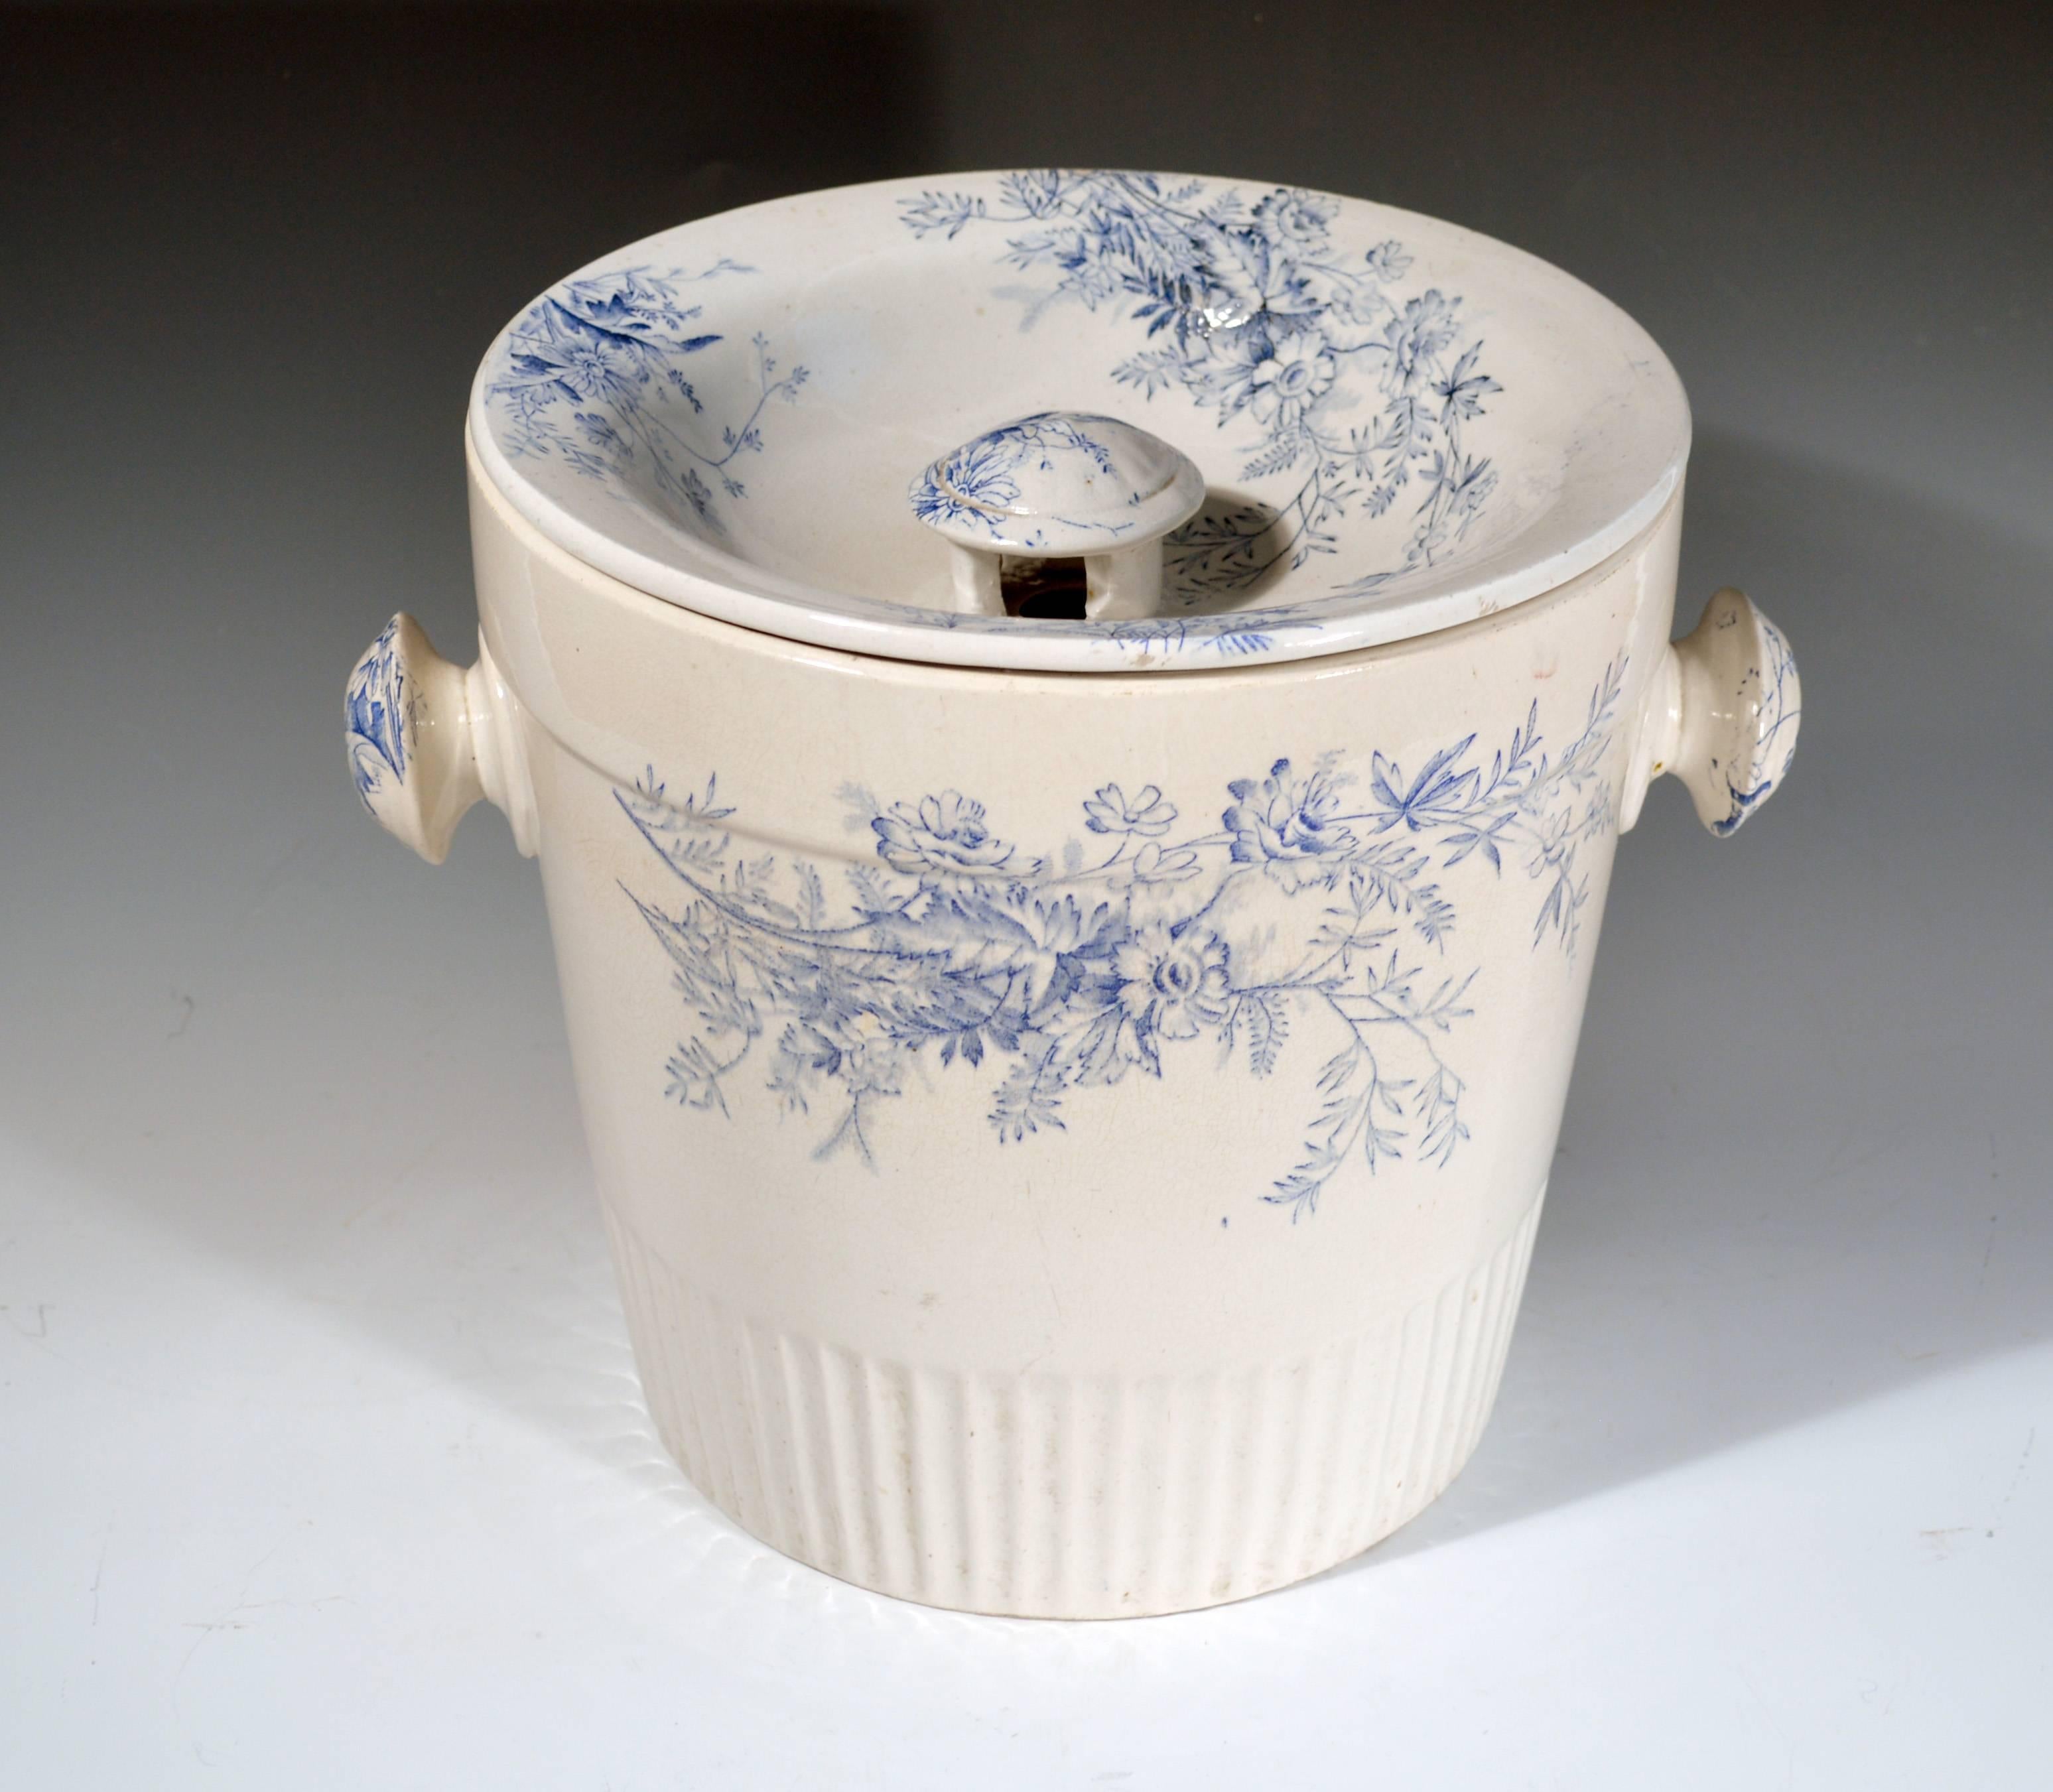 Blue and white floral pottery covered pil and cover,
Vera pottery,
circa 1900-1930.

The cylindrical pail with exterior knob handles has a reeded lower section and a printed blue and white design to each side, handles and cover. The cover with